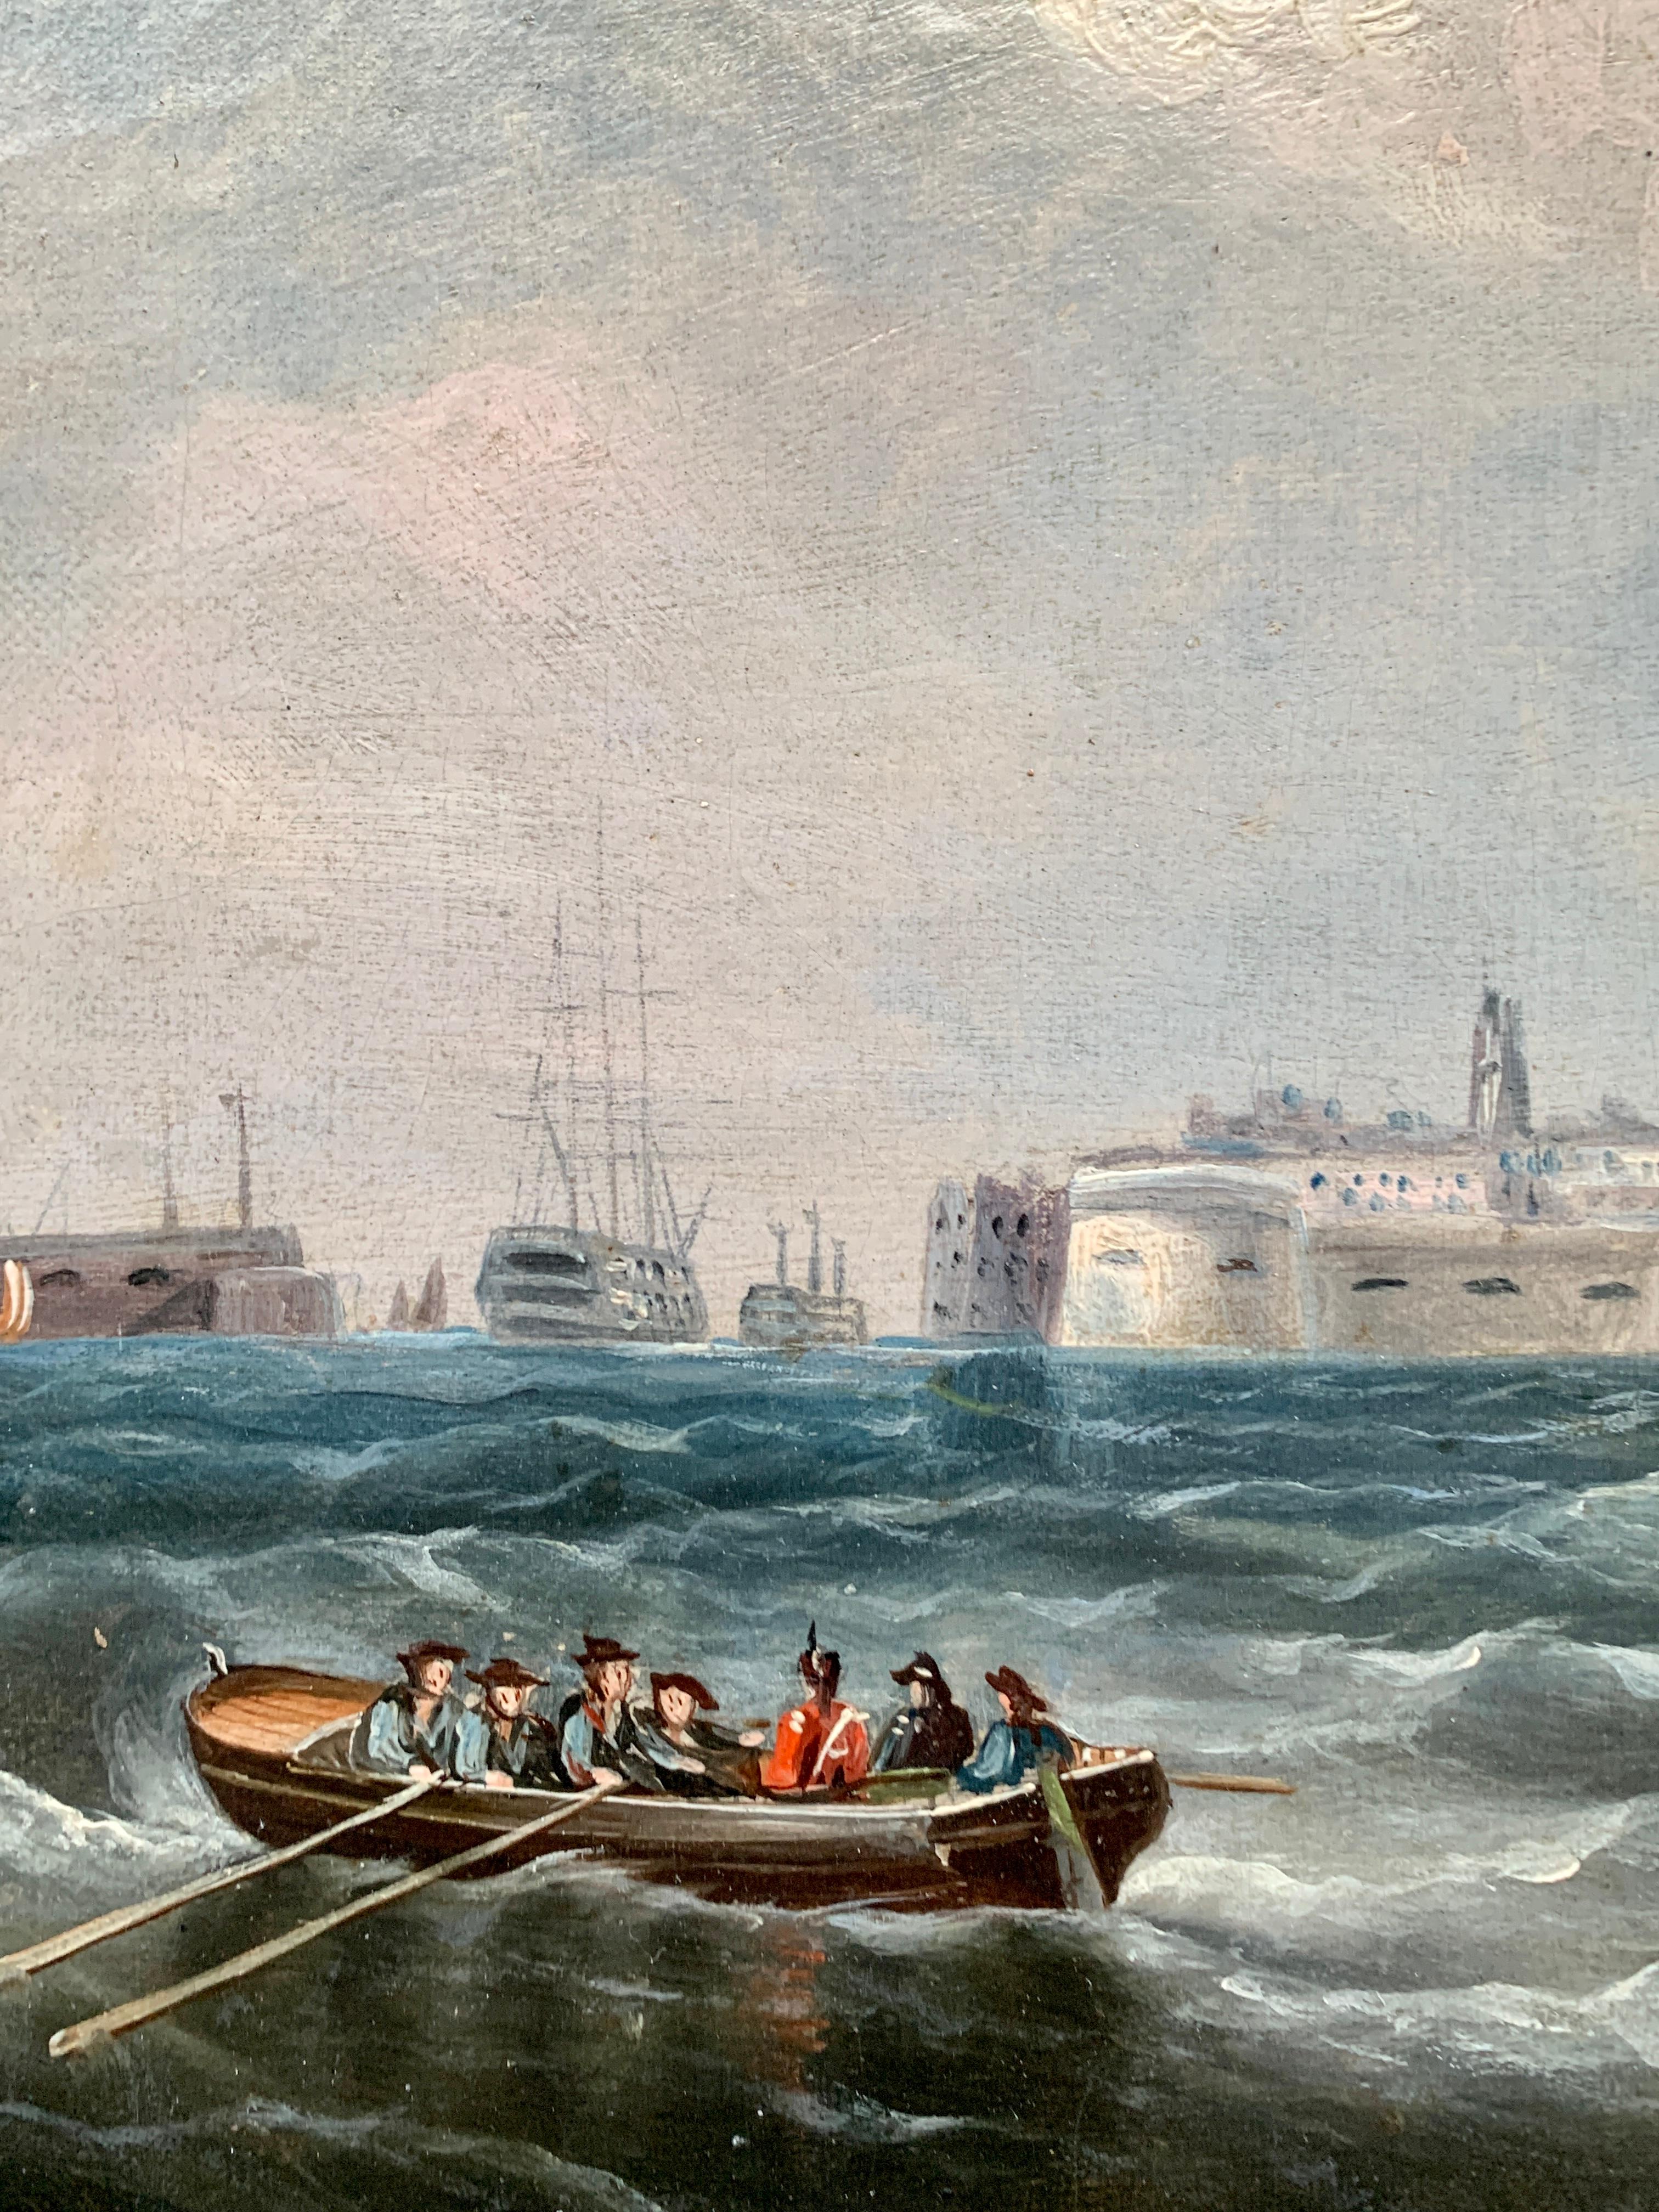 Antique English marine View of Portsmouth harbor, with yachts and a warship sailing just outside the harbor.

R. B. Spencer is known for his portraits of ships. It is thought that he is the brother of William Barnett Spencer who painted the same